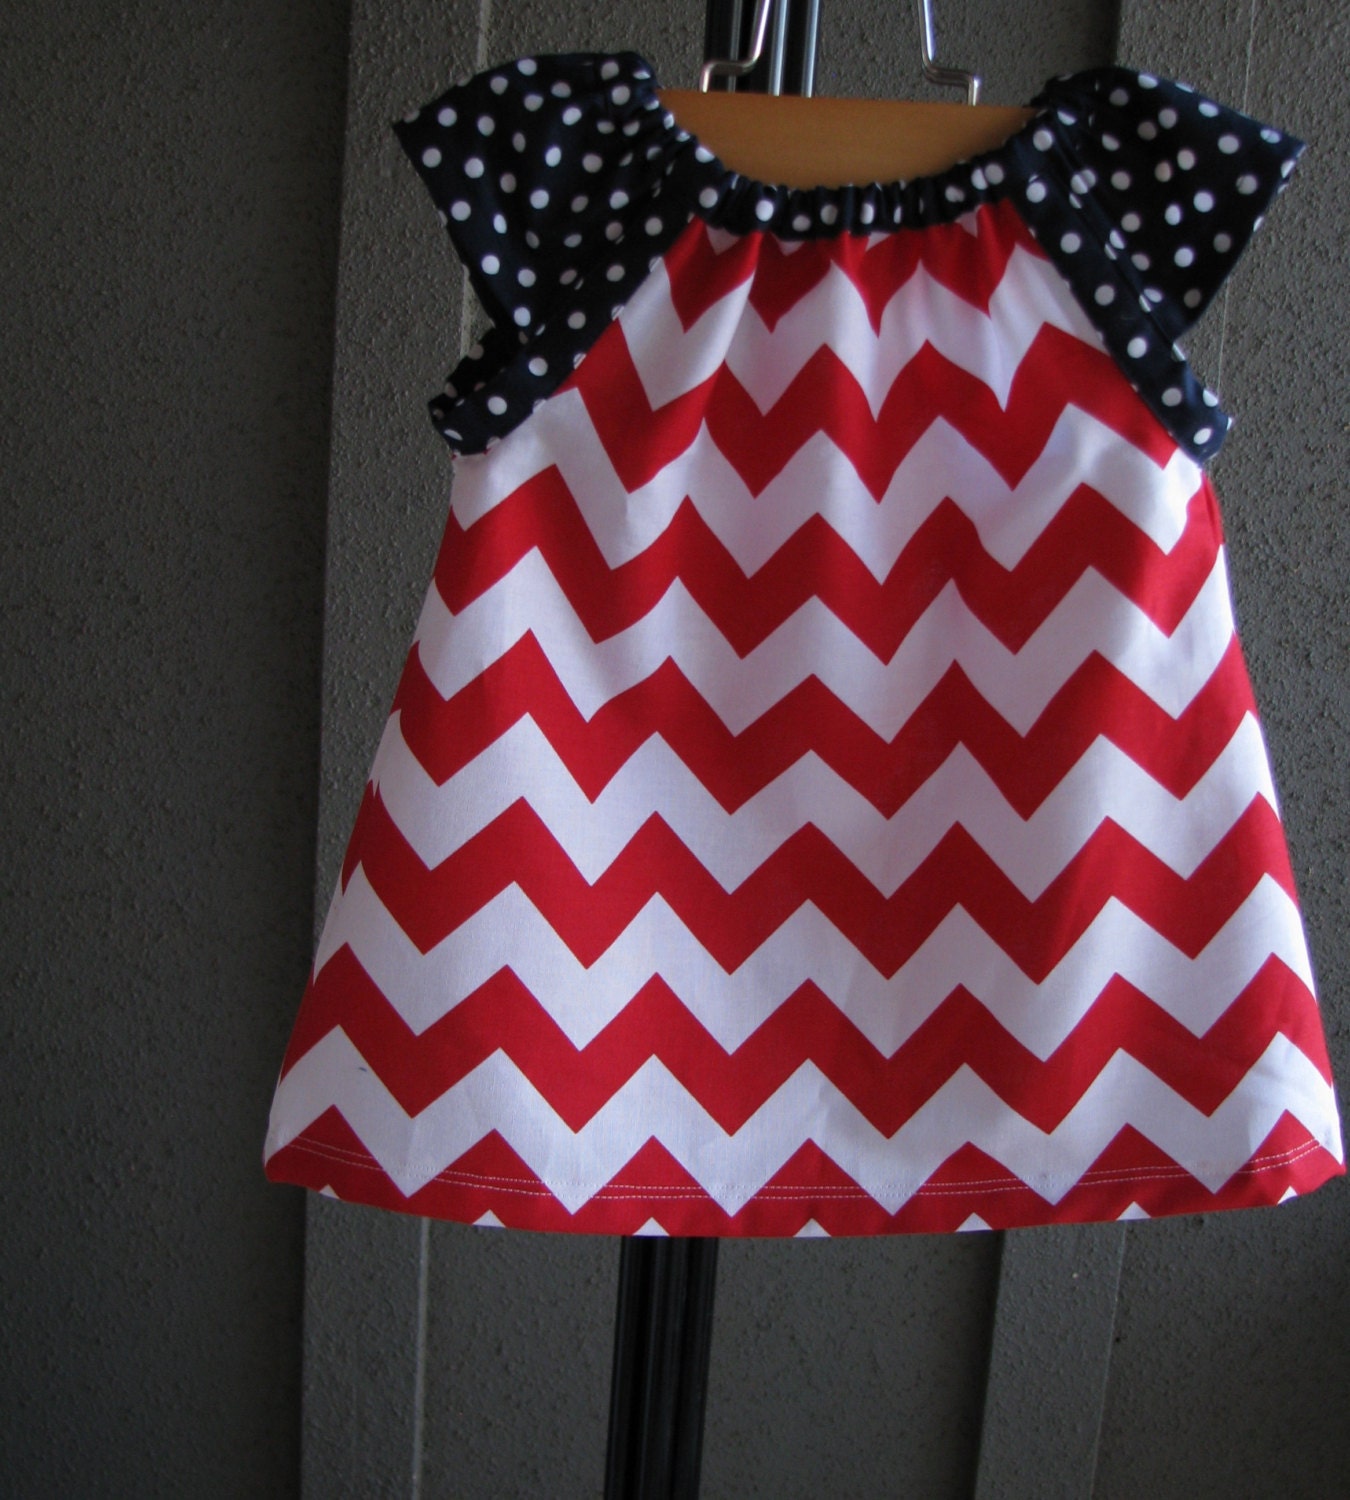 Dress - 4th of July chevron zigzag red white blue girl baby toddler  0-3 months, 3-6, 6-12, 12-18, 18-24, 2T, 3T 4T 5T nautical 4th of July